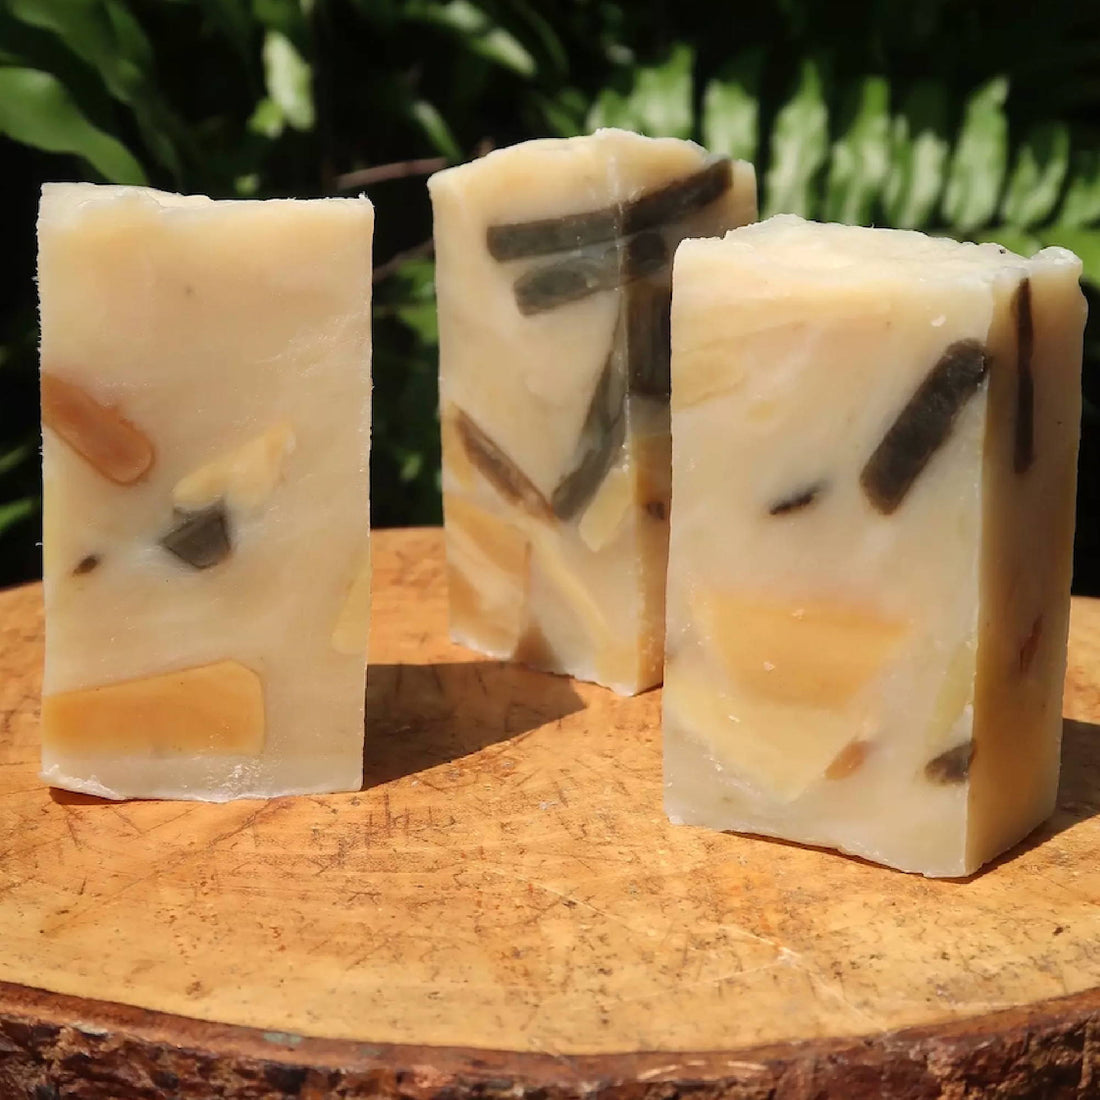 Donata's Blended to The Max: Is This Soap Right for You